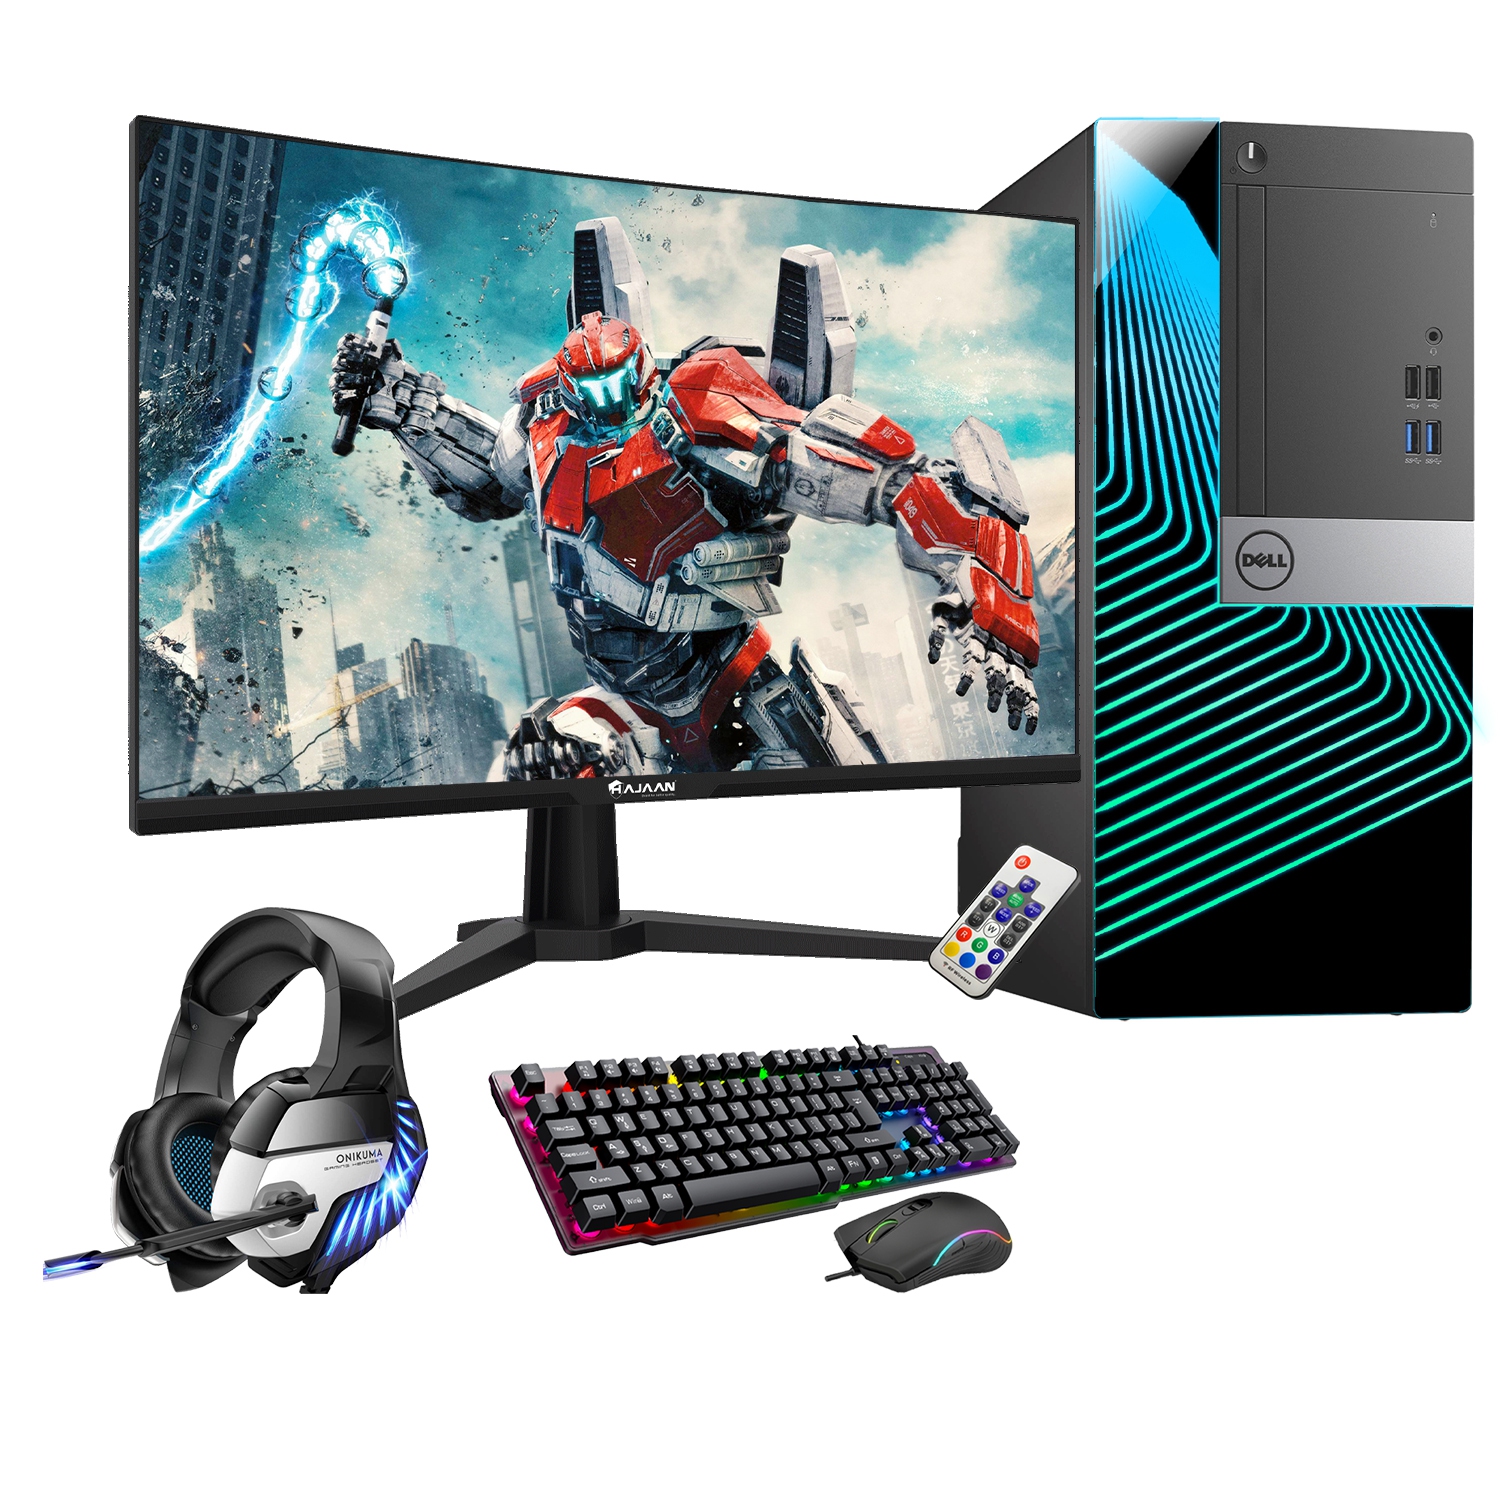 Refurbished (Good) - Dell OptiPlex Tower Computer with 27" Gaming Monitor i7 6700 3.4 GHz NVIDIA GT 1030 2GB 32GB RAM 512GB SSD Win 10 Pro, Gaming Headset, HAJAAN Keyboard & Mouse